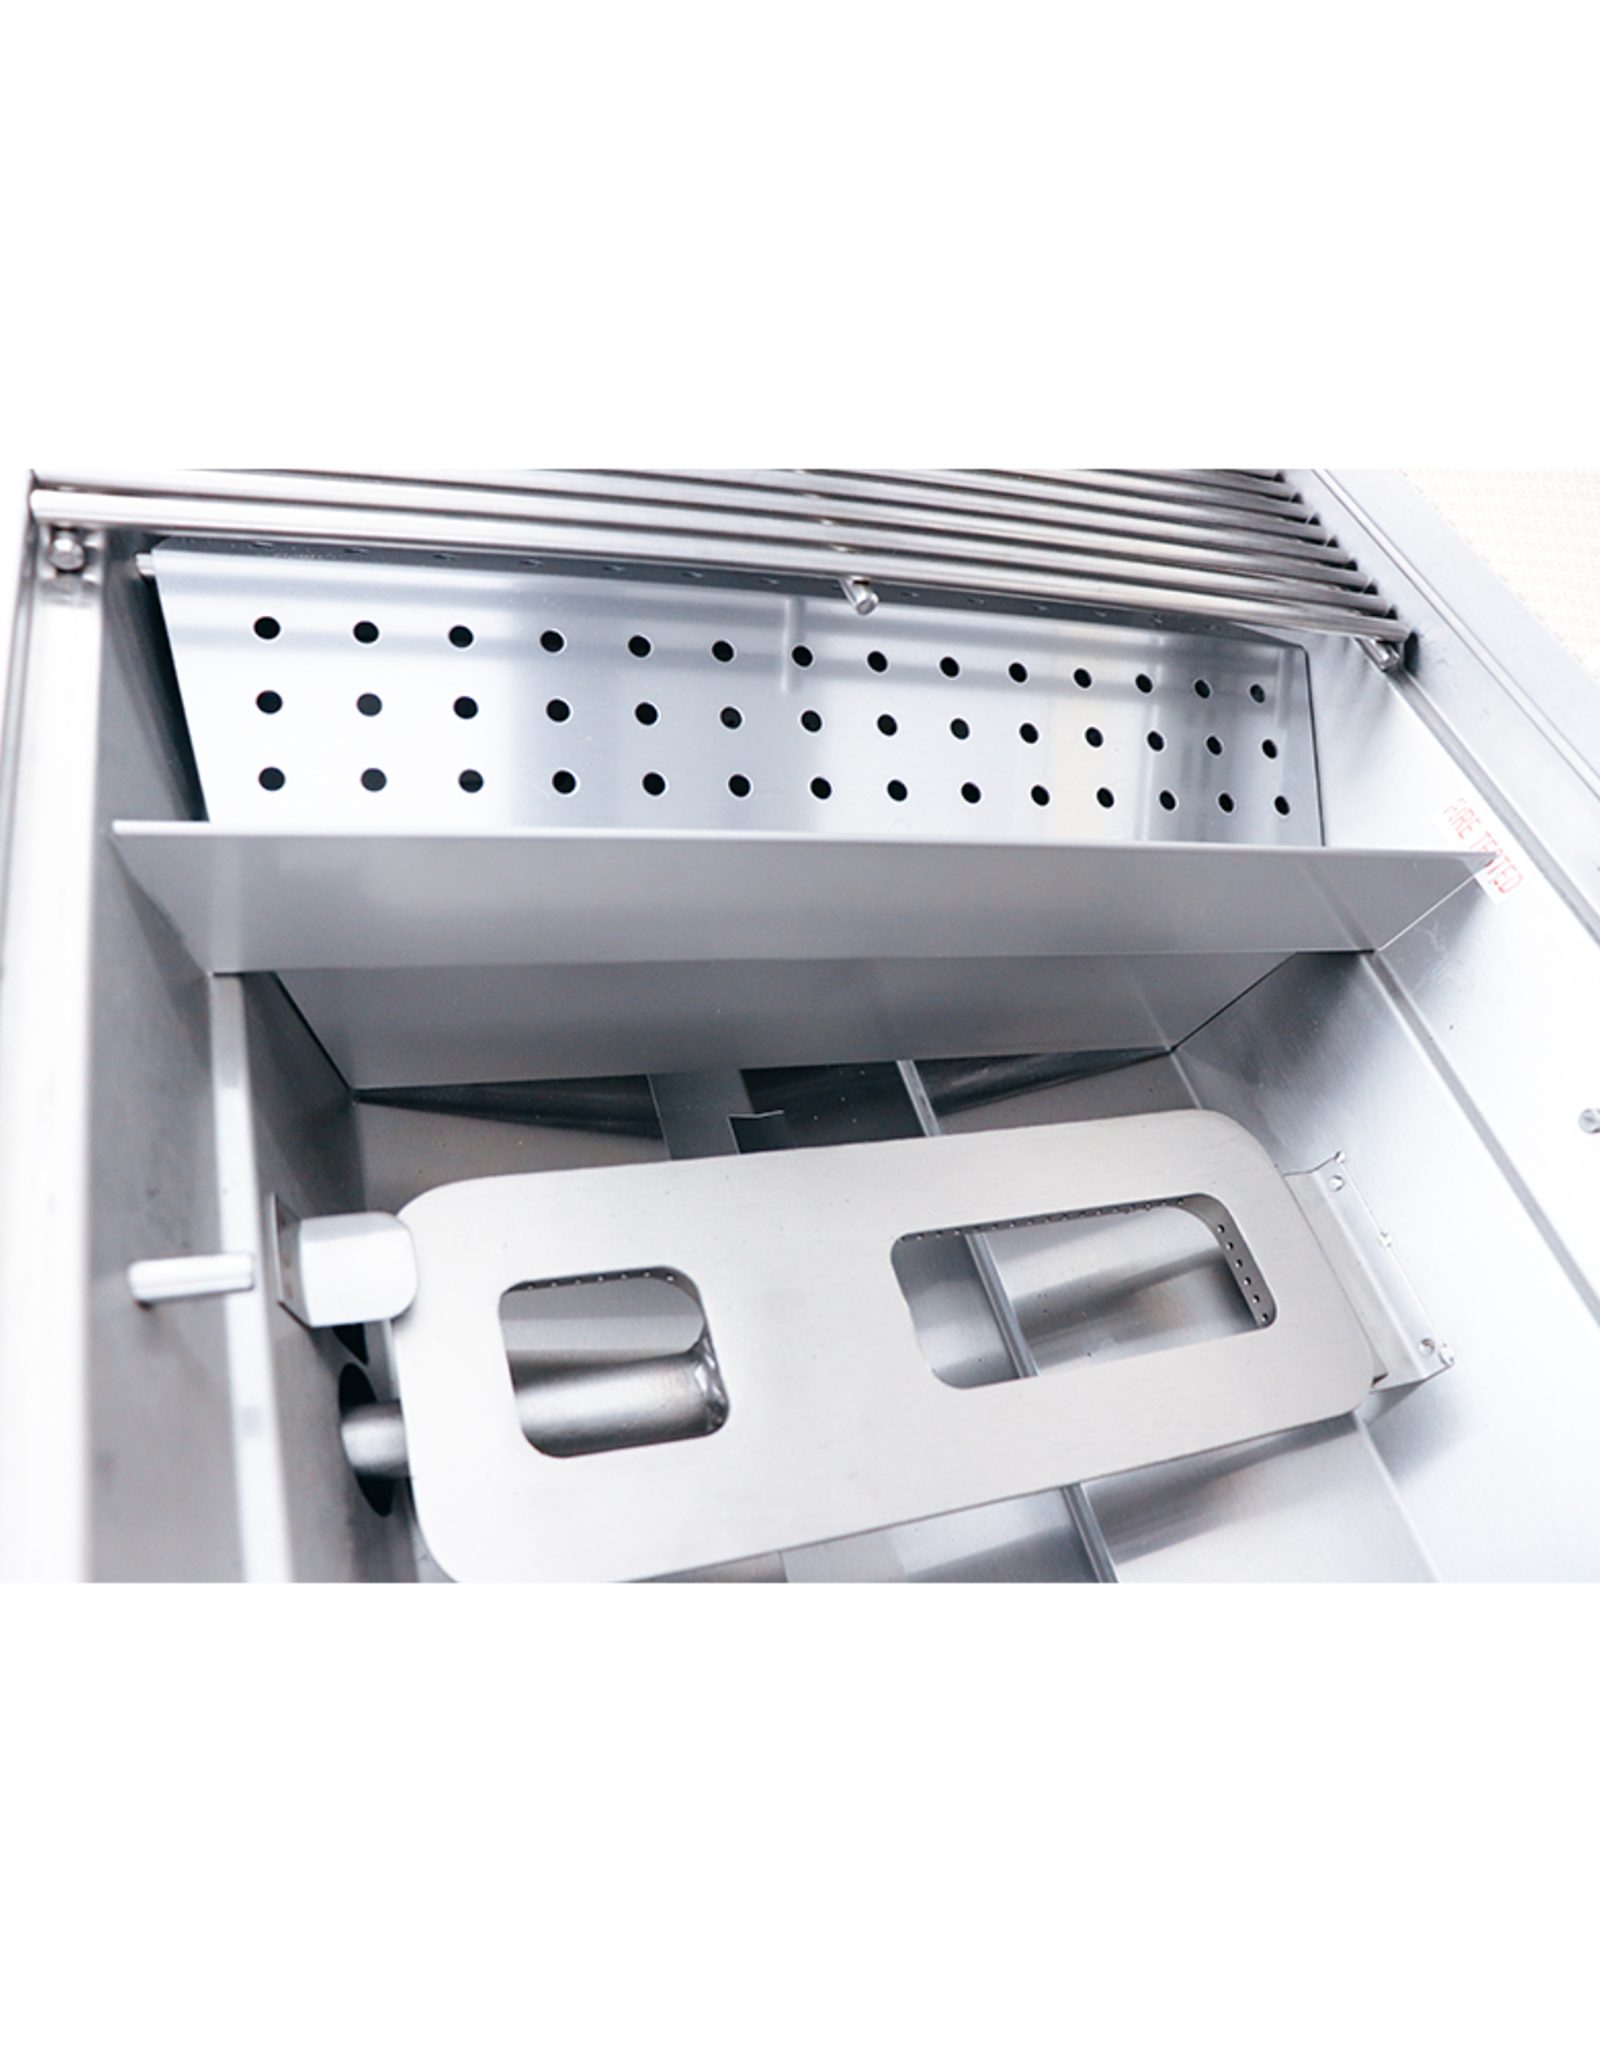 Renaissance Cooking Systems Renaissance Cooking Systems 38" Cutlass Pro Drop-In Grill - RON38A